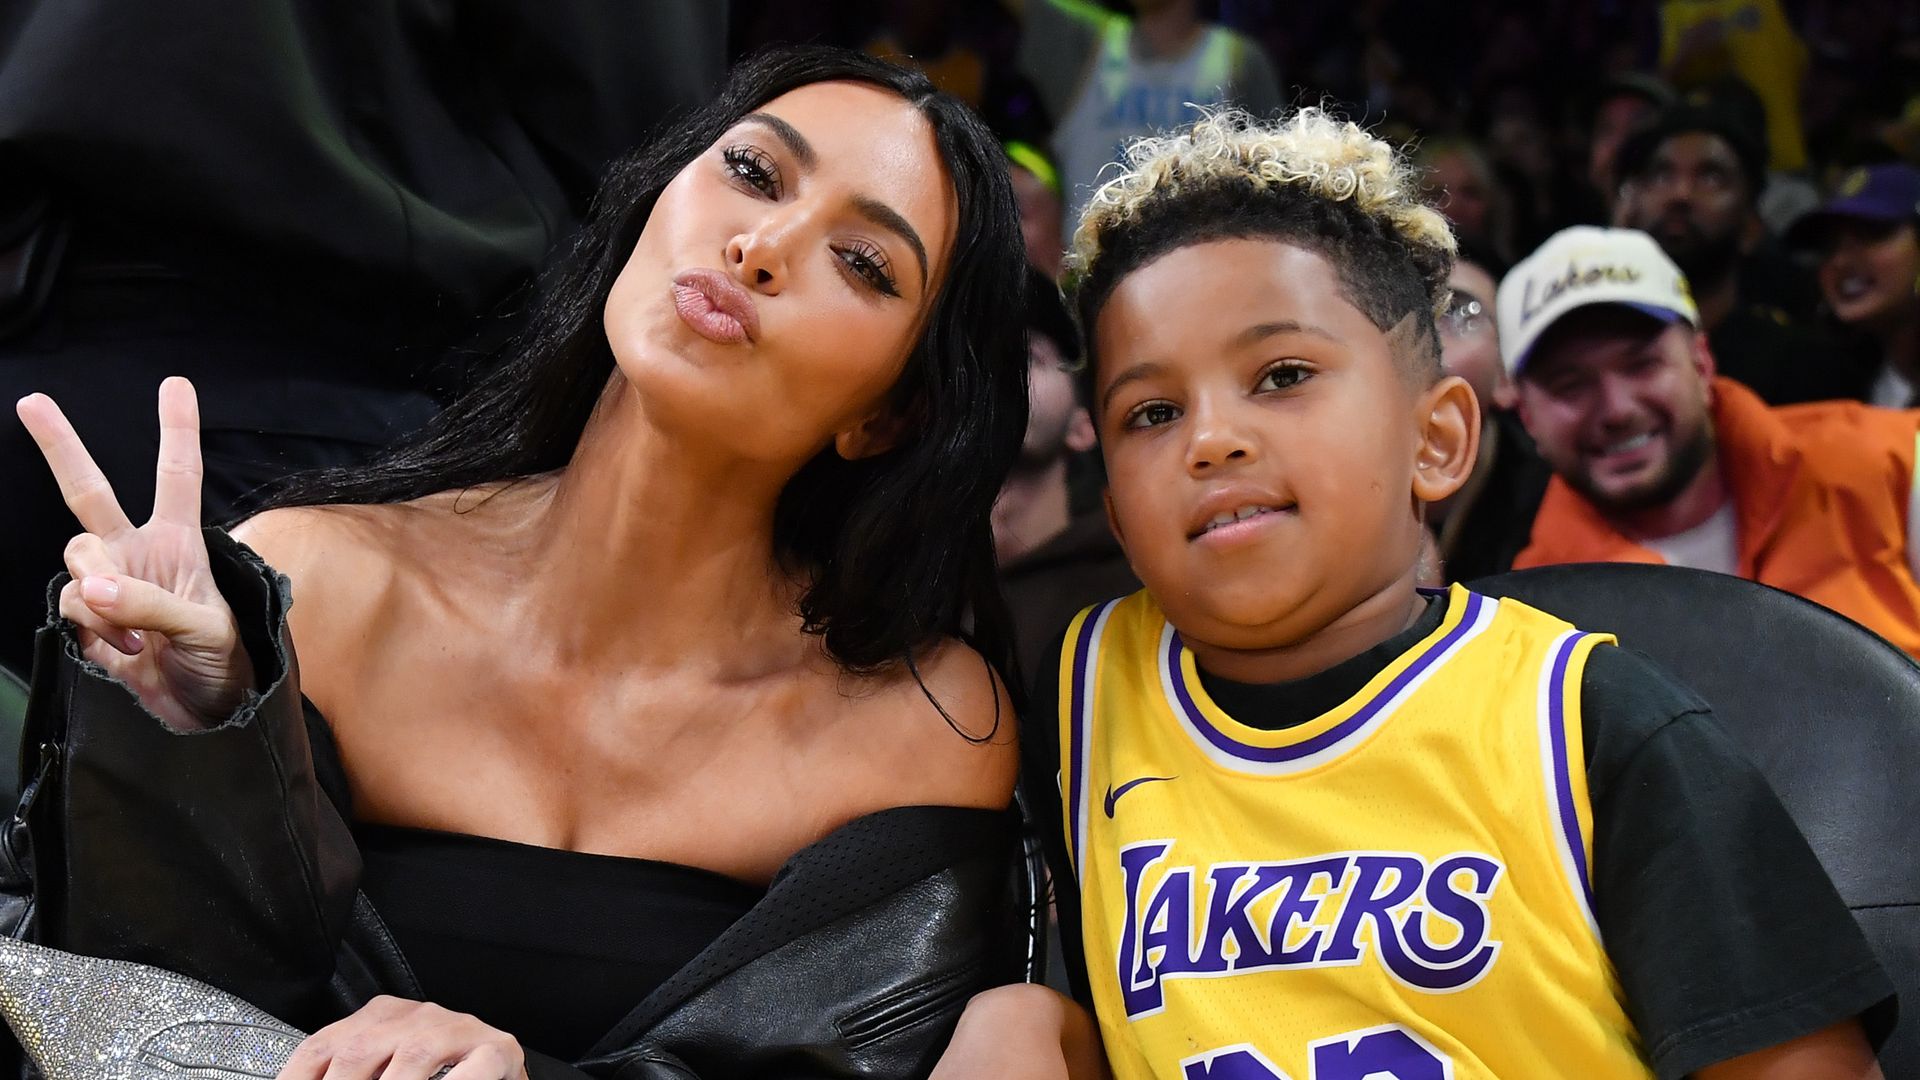 Kim Kardashian's family photo leaves fans in disbelief at what's in the background - see photo